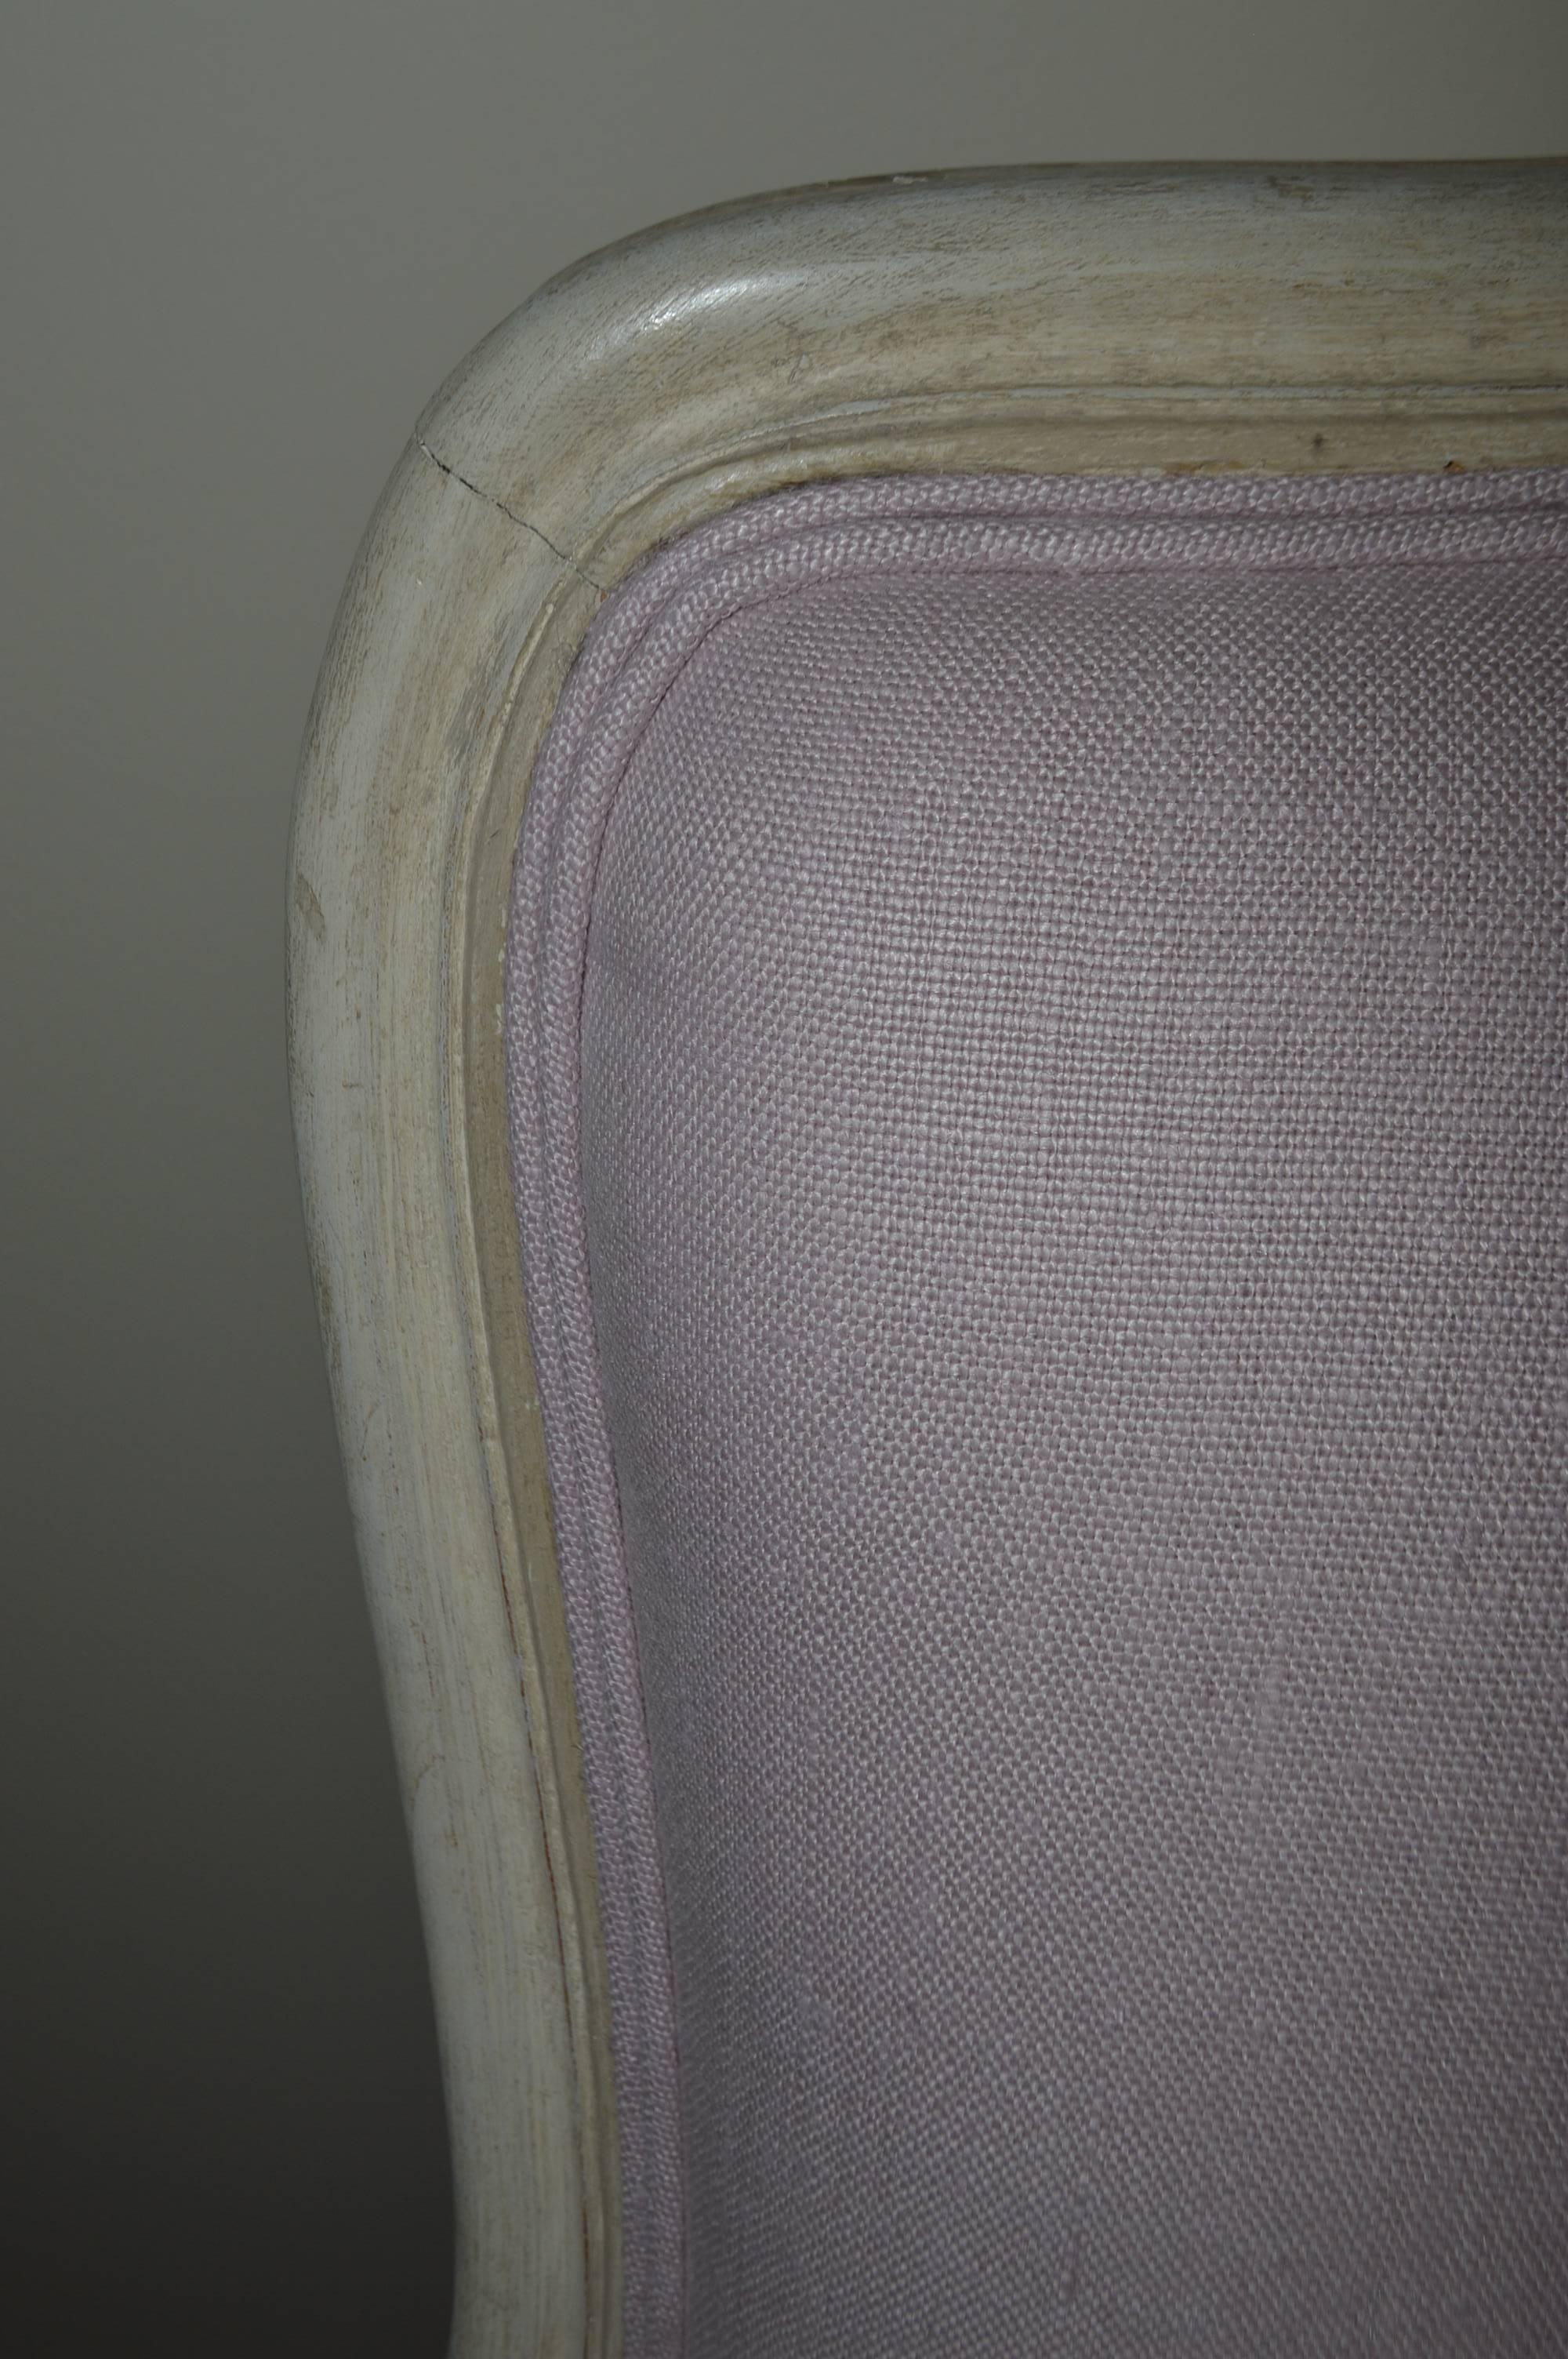 Patinated Louis XV Style Painted Bergere Chair Upholstered in a Lavender Linen